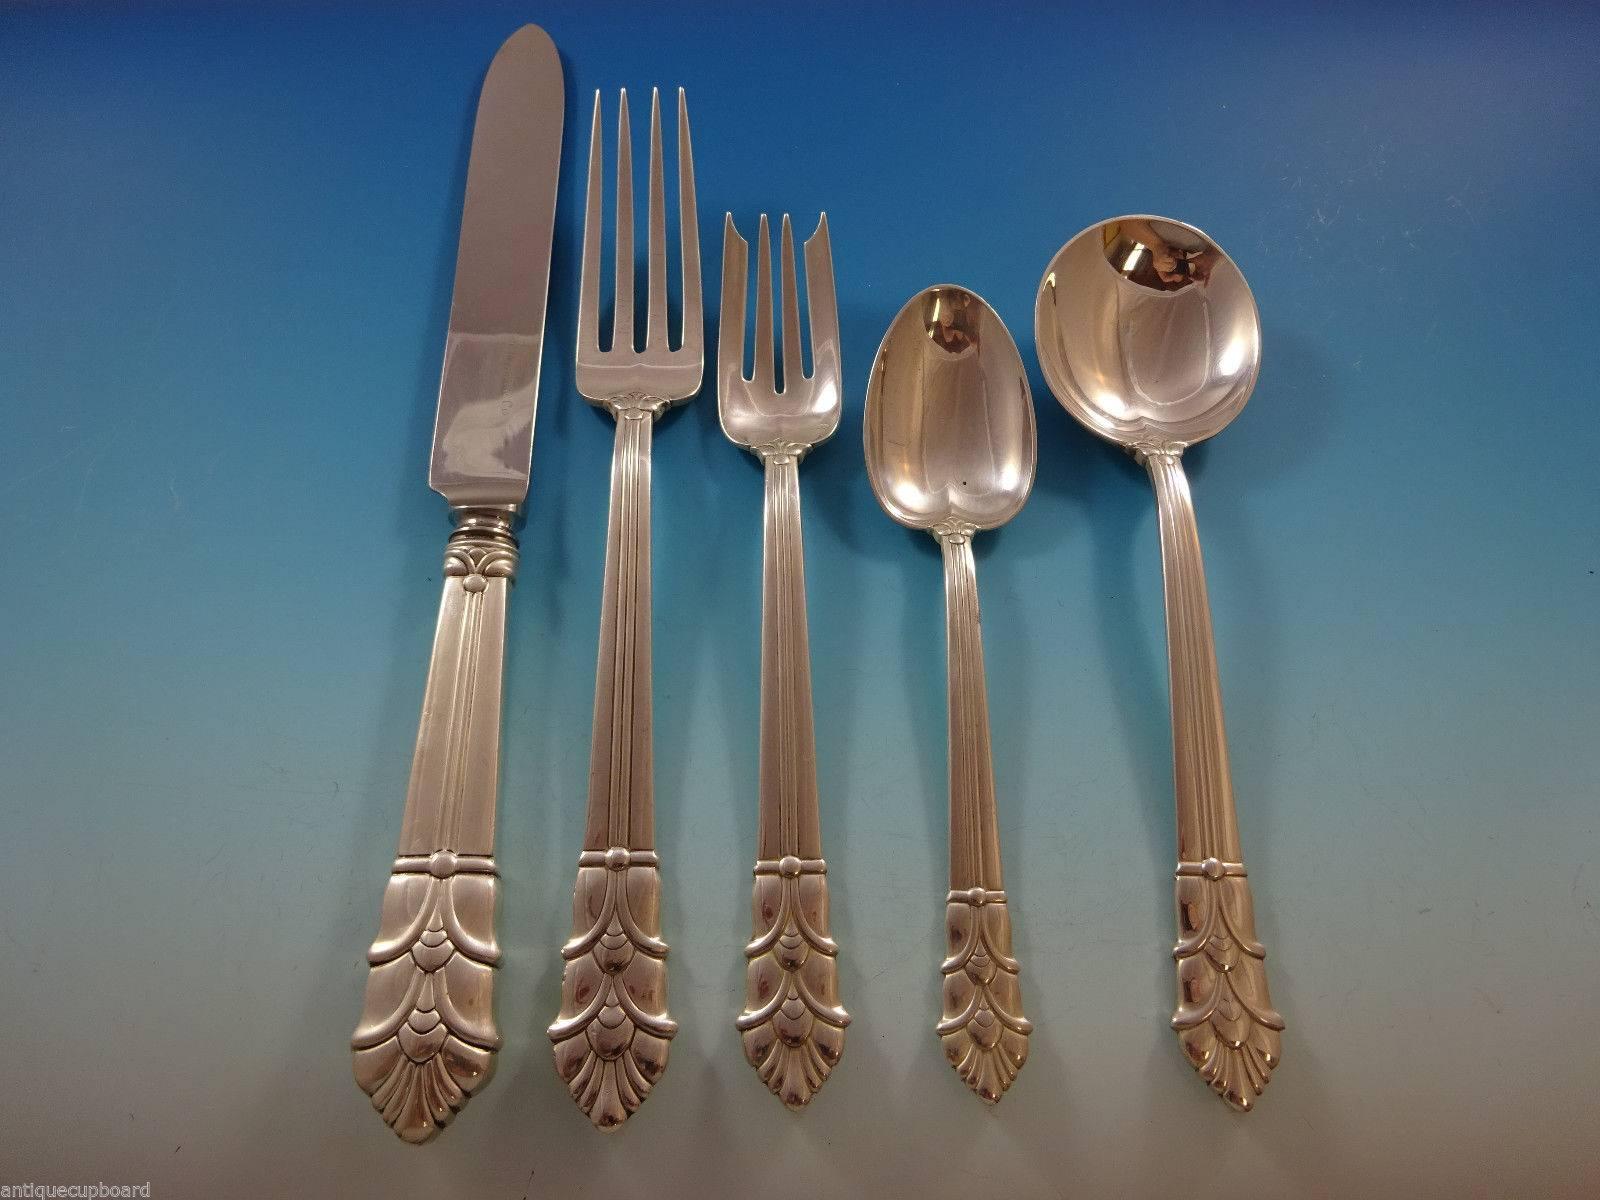 Exceptional Palmette by Tiffany & Co. Dinner size sterling silver flatware set, 65 pieces. This set includes:

12 dinner size knives, pointed, 9 3/4